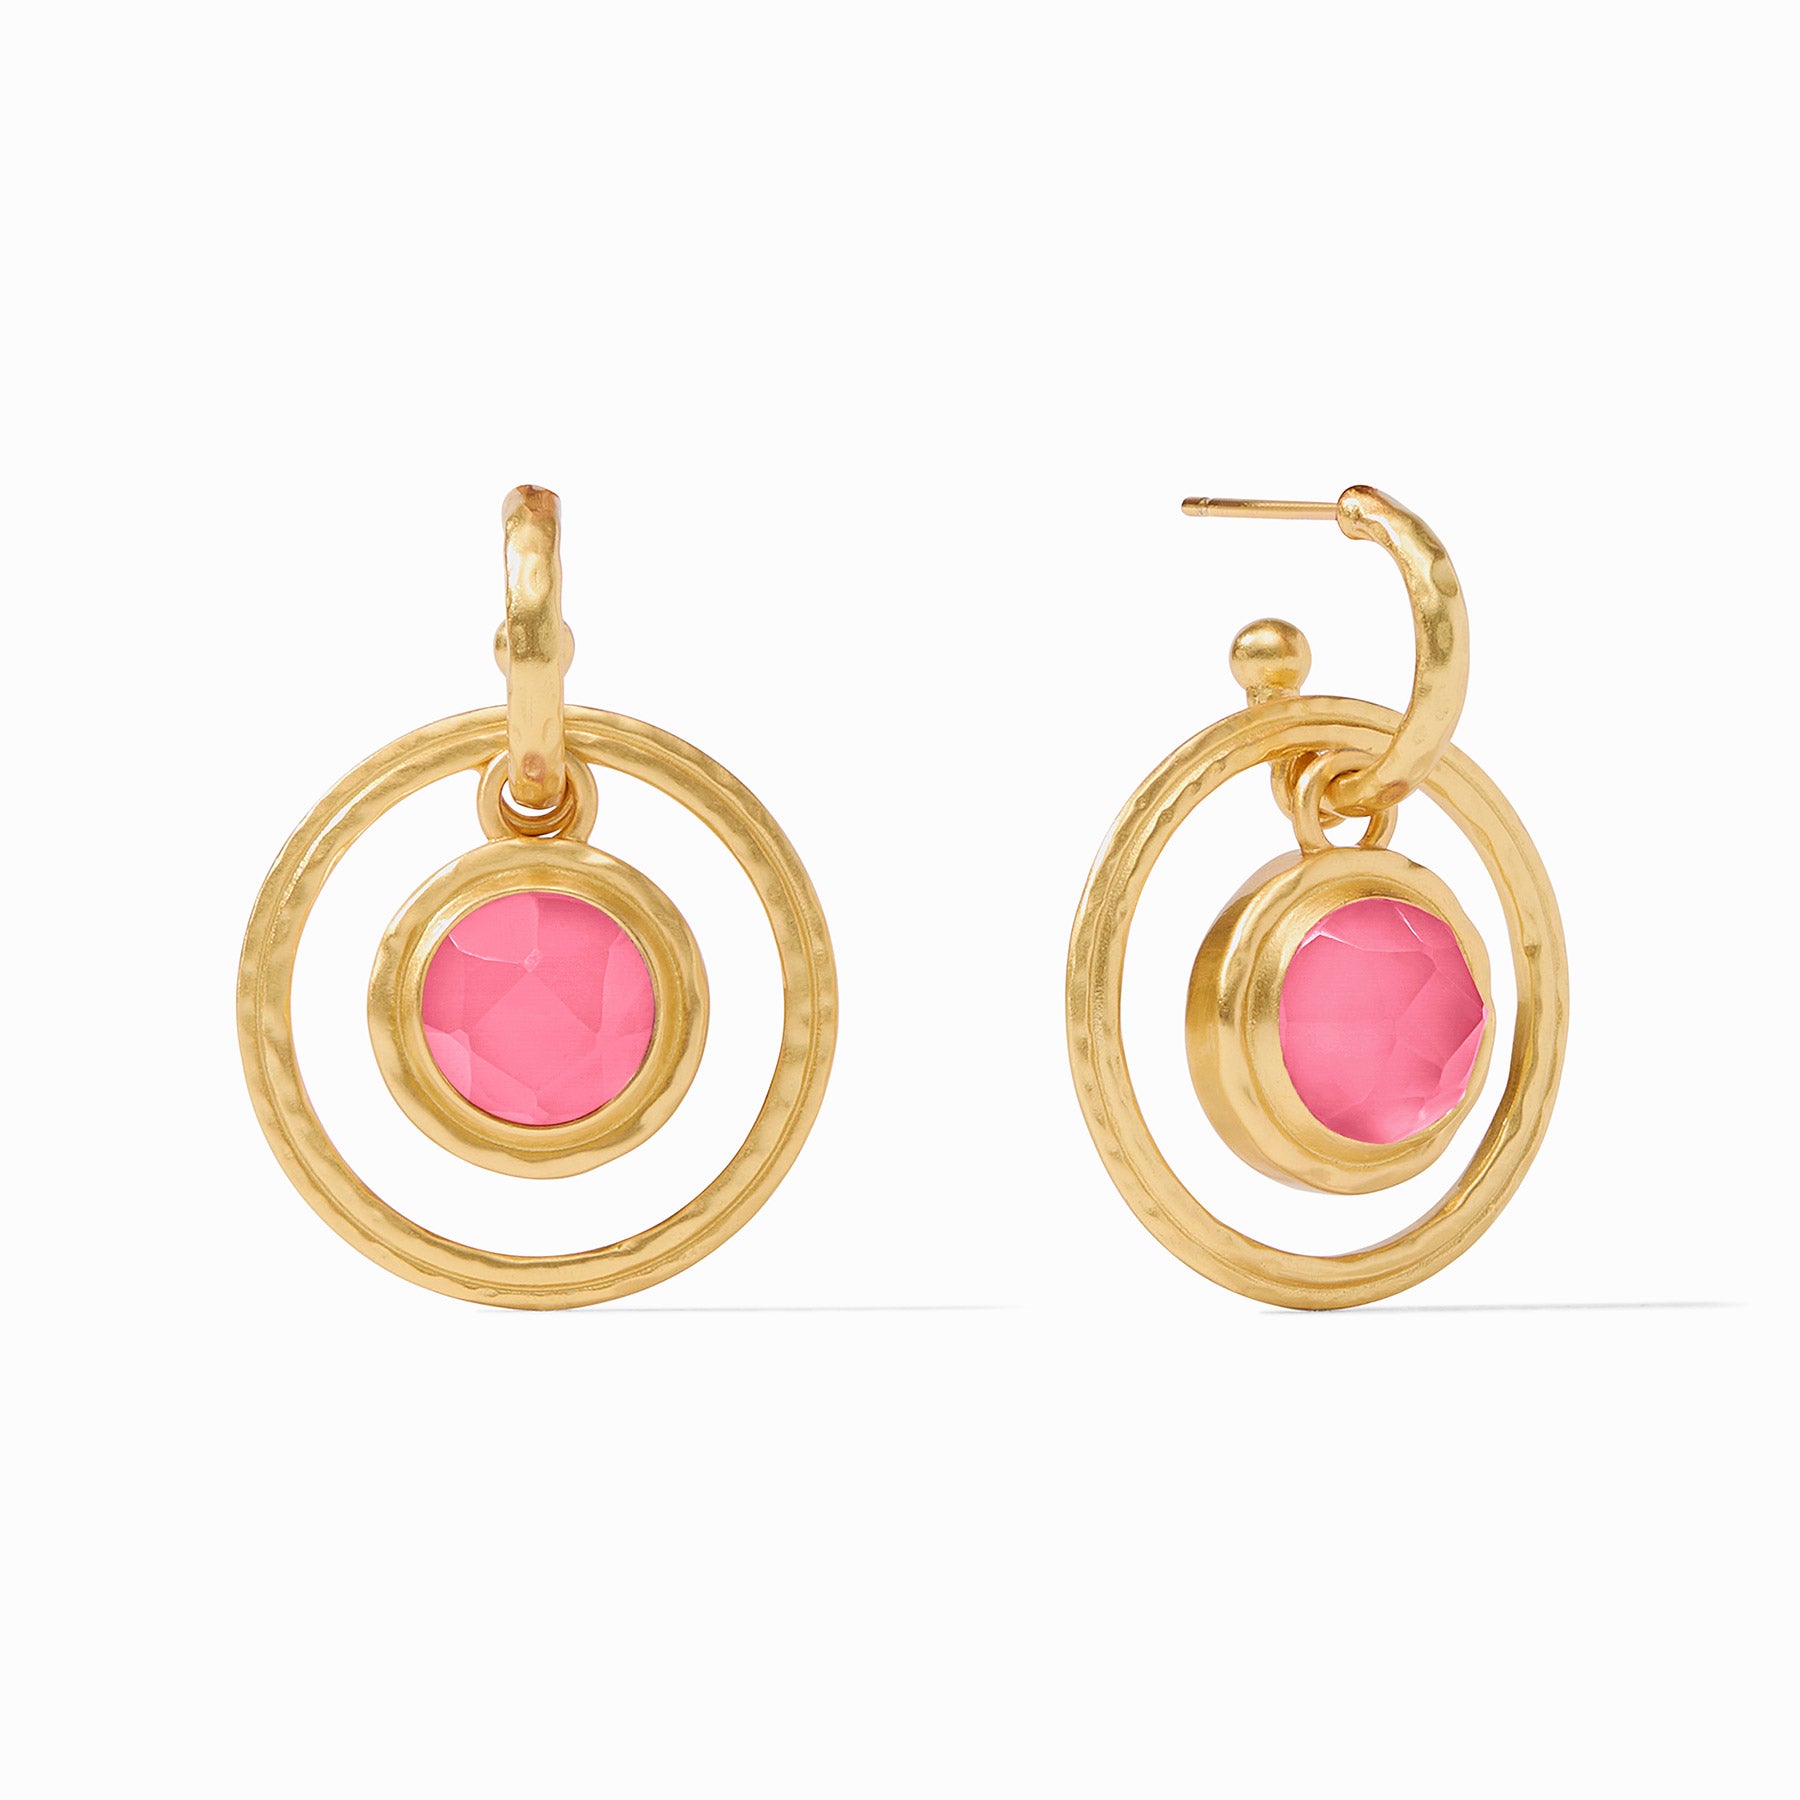 Julie Vos - Astor 6-in-1 Charm Earring, Iridescent Peony Pink